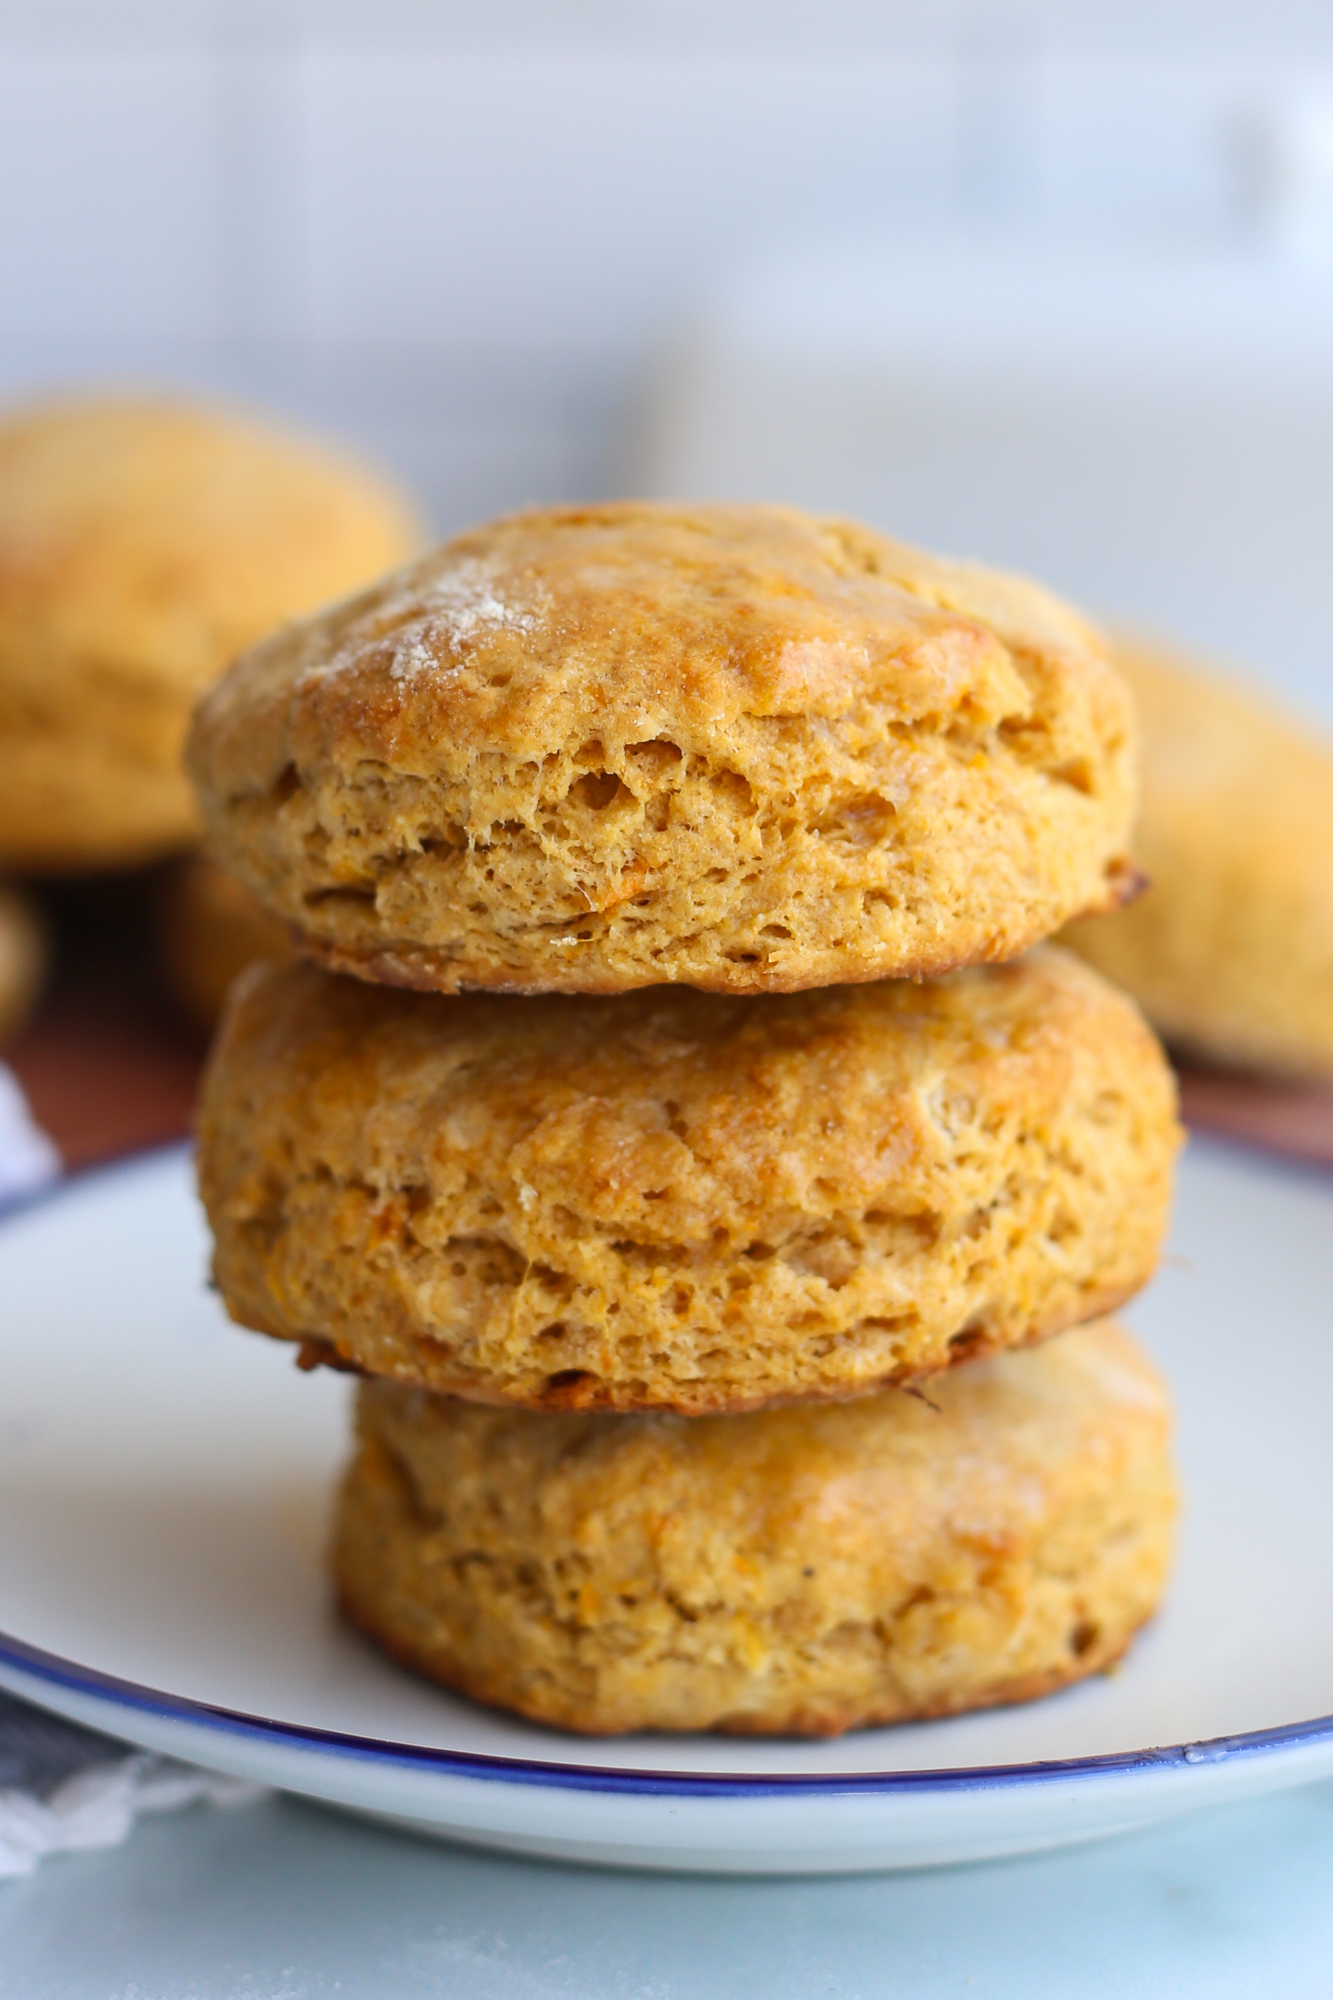 Three sweet potato biscuits stacked on a plate.